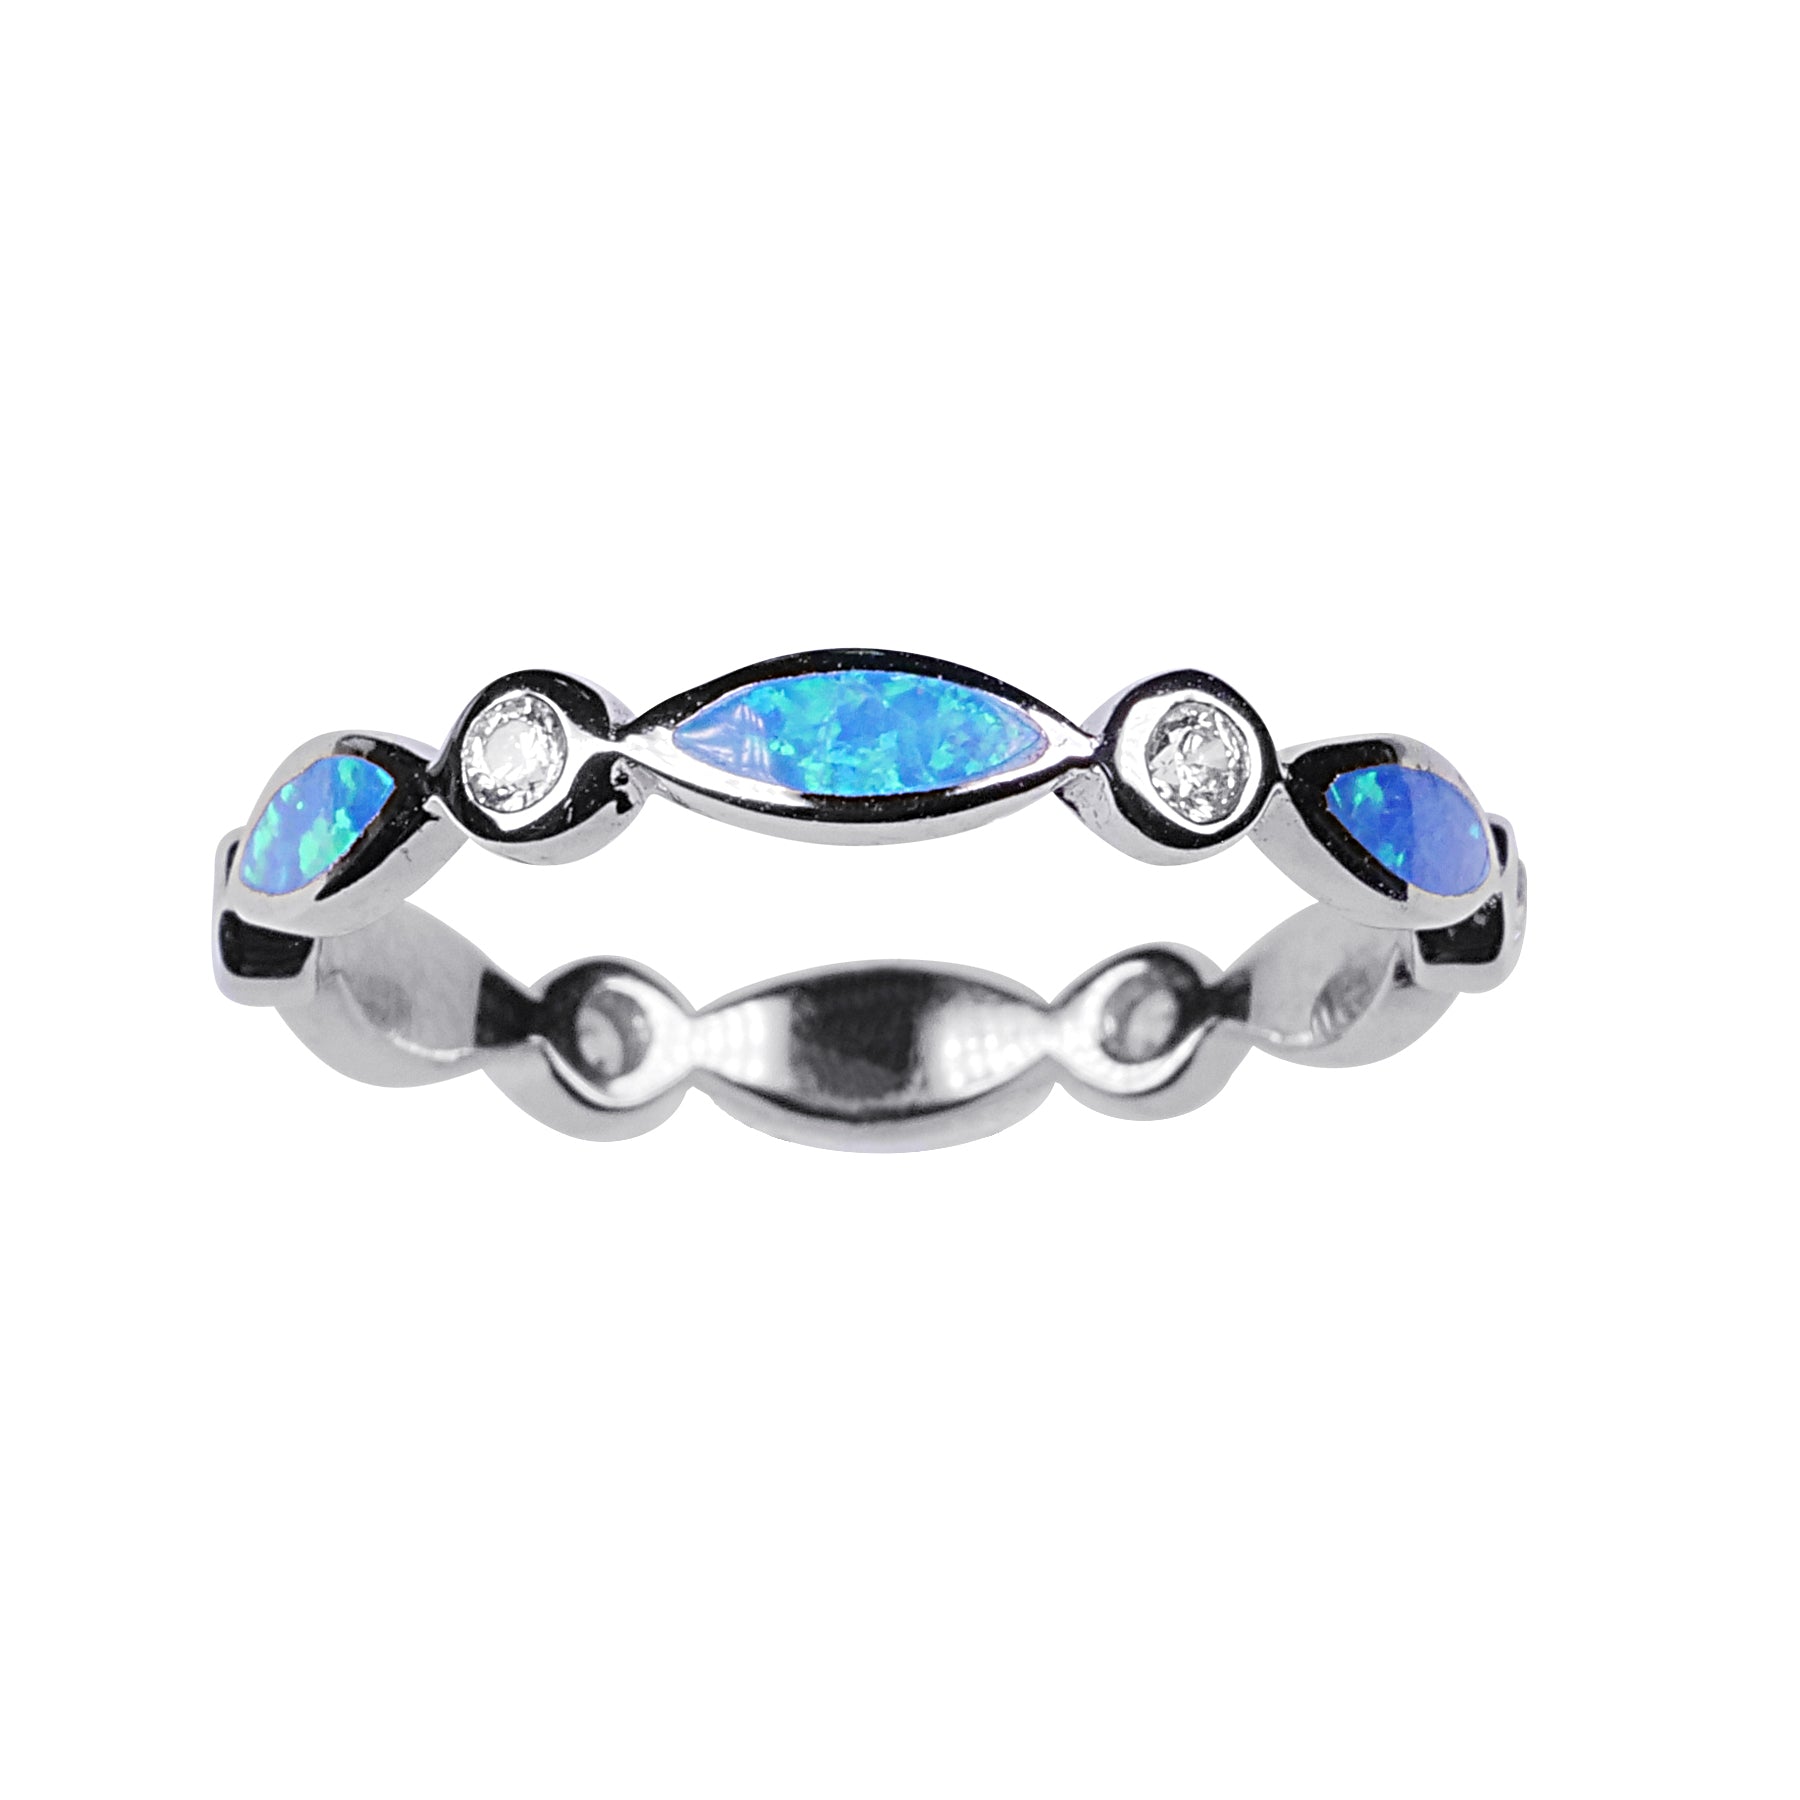 Toe Ring With Capri Blue Crystal